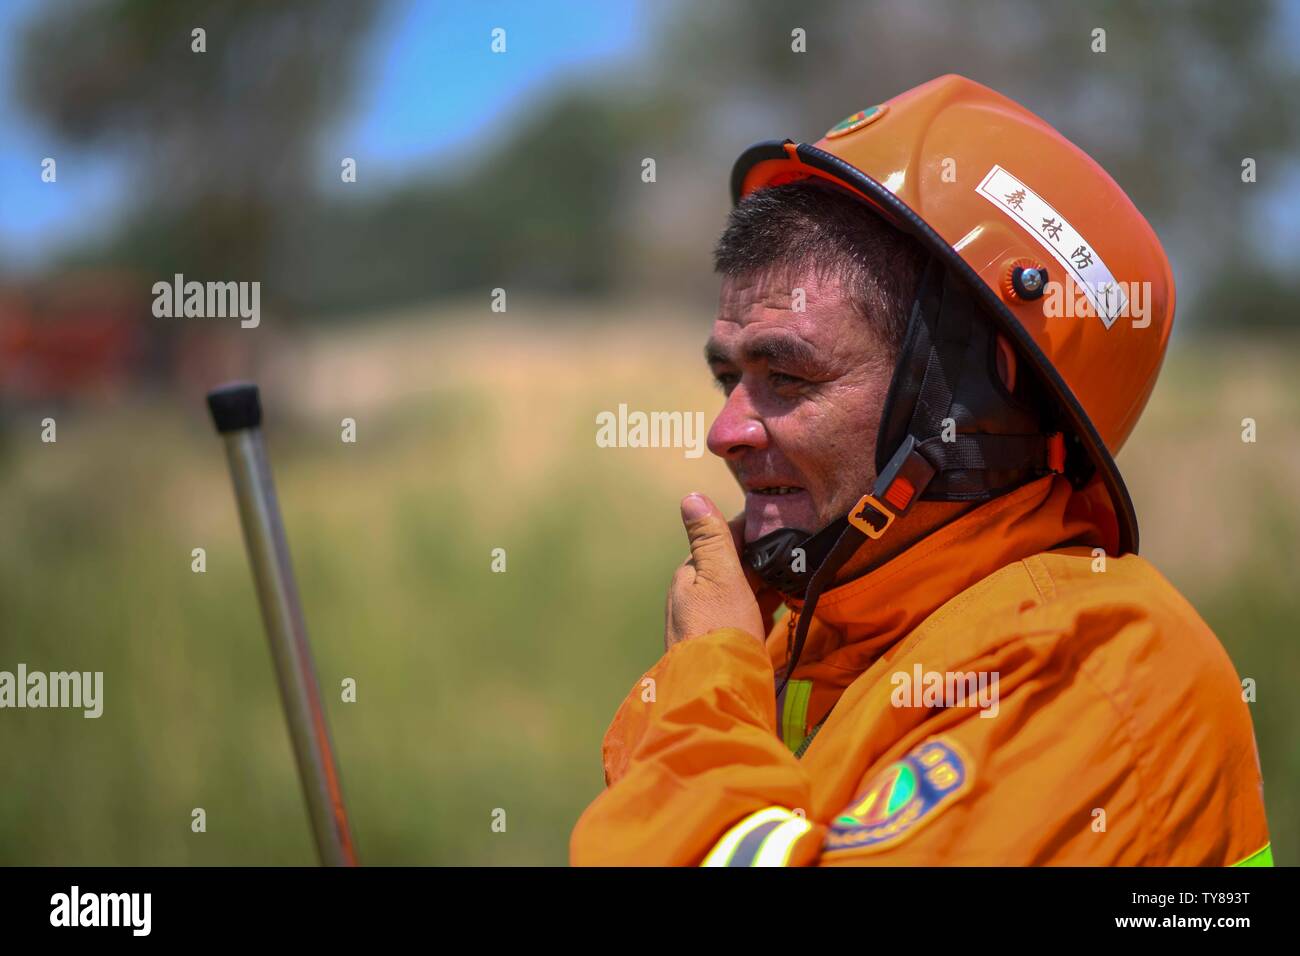 (190626) -- YULI, June 26, 2019 (Xinhua) -- A firefighter is seen after a drill at Lop Nur national wetland park in Yuli County, northwest China's Xinjiang Uygur Autonomous Region, on June 19, 2019. Heatwaves sweep the Tarim Basin every summer, and the temperature reached over 45 degrees Celsius here in this June. Situated at the border of Tarim Basin, Yuli County is exposed to the threat of forest fires. In order to prevent this risk, a batch of selected firefighters have done their firefighting work for years. They shuttle in wide expanse of desert poplars to protect the area. (Xinhua/Zhao G Stock Photo